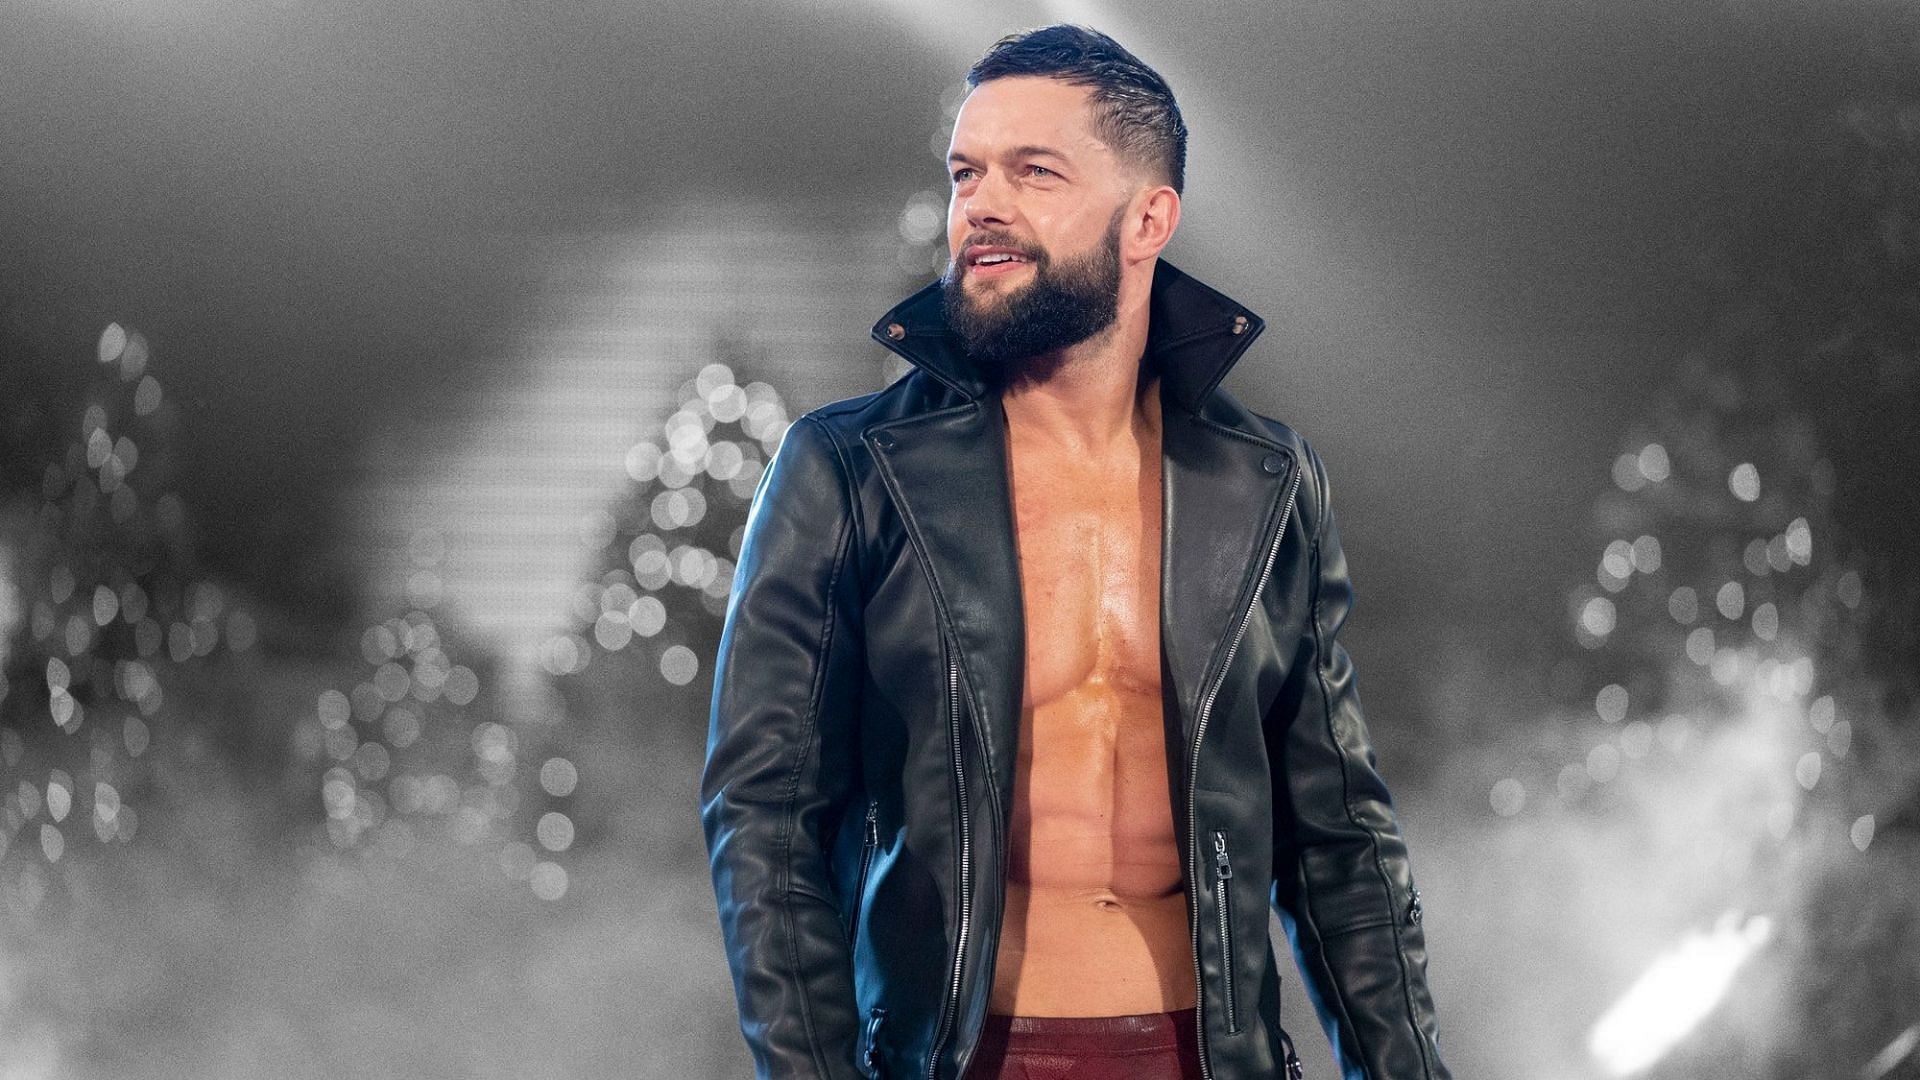 Finn Balor is the new WWE United States Champion